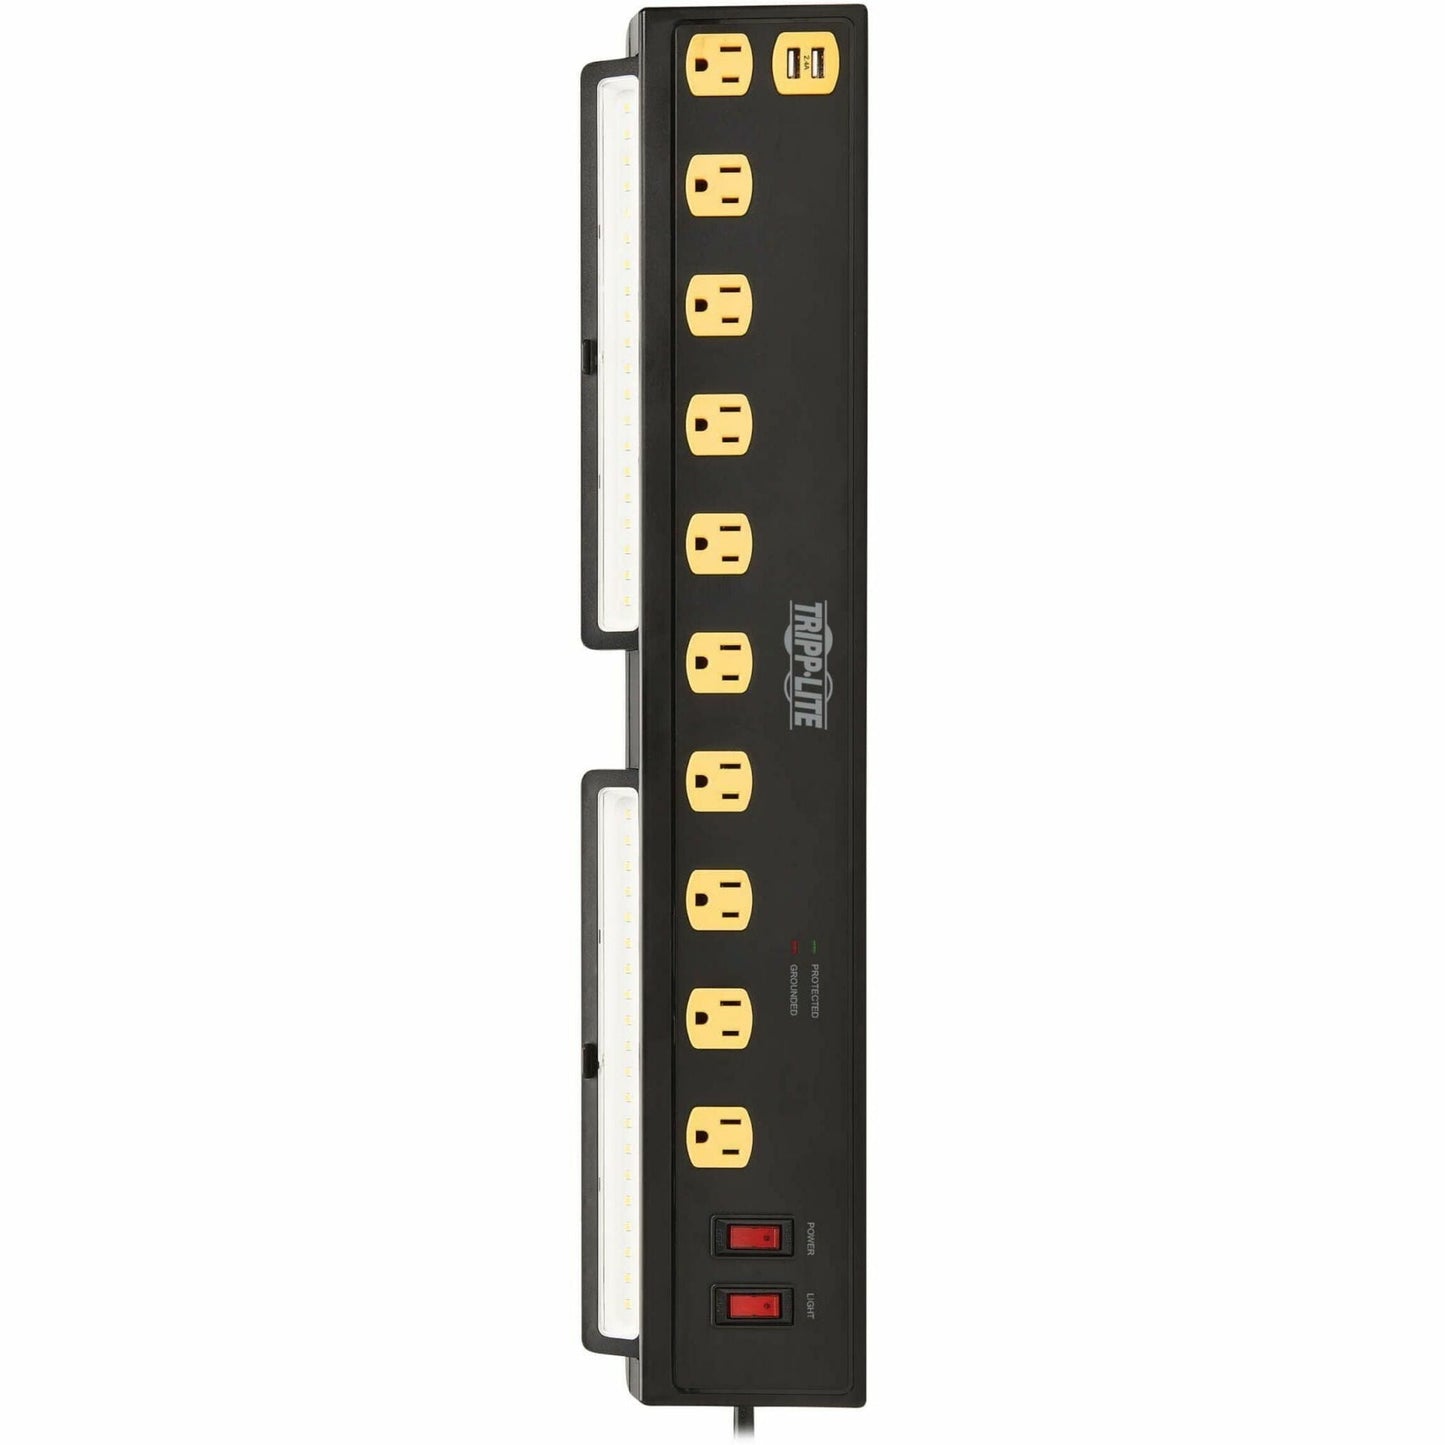 Tripp Lite Protect It! 10-Outlet Surge Protector with Swivel Light Bars - 5-15R Outlets 2 USB Ports 6 ft. (1.8 m) Cord 1350 Joules Black